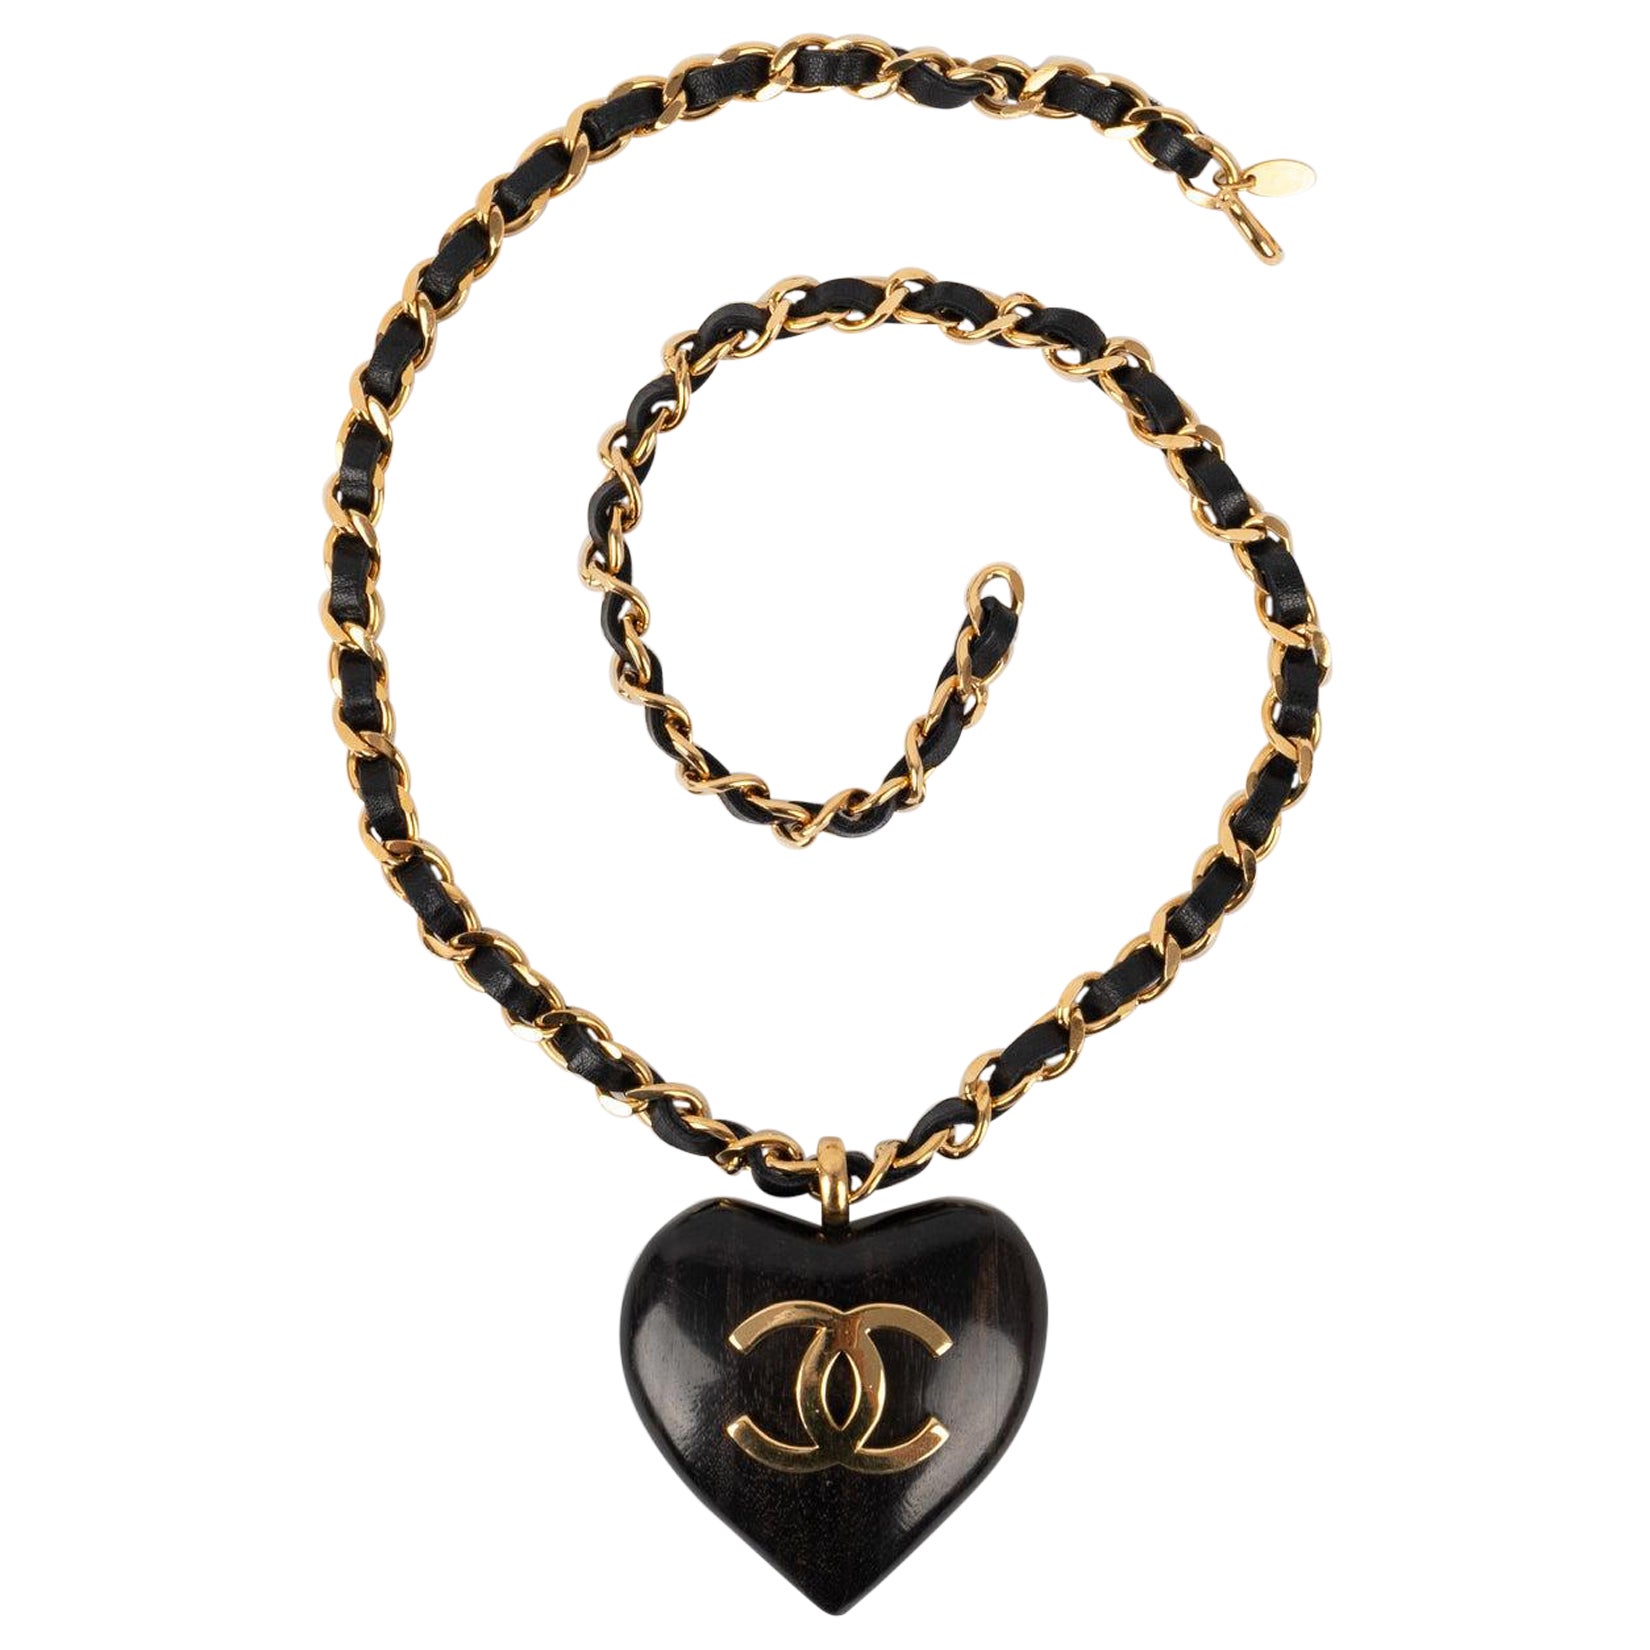 Chanel "Heart" Necklace, 1992 